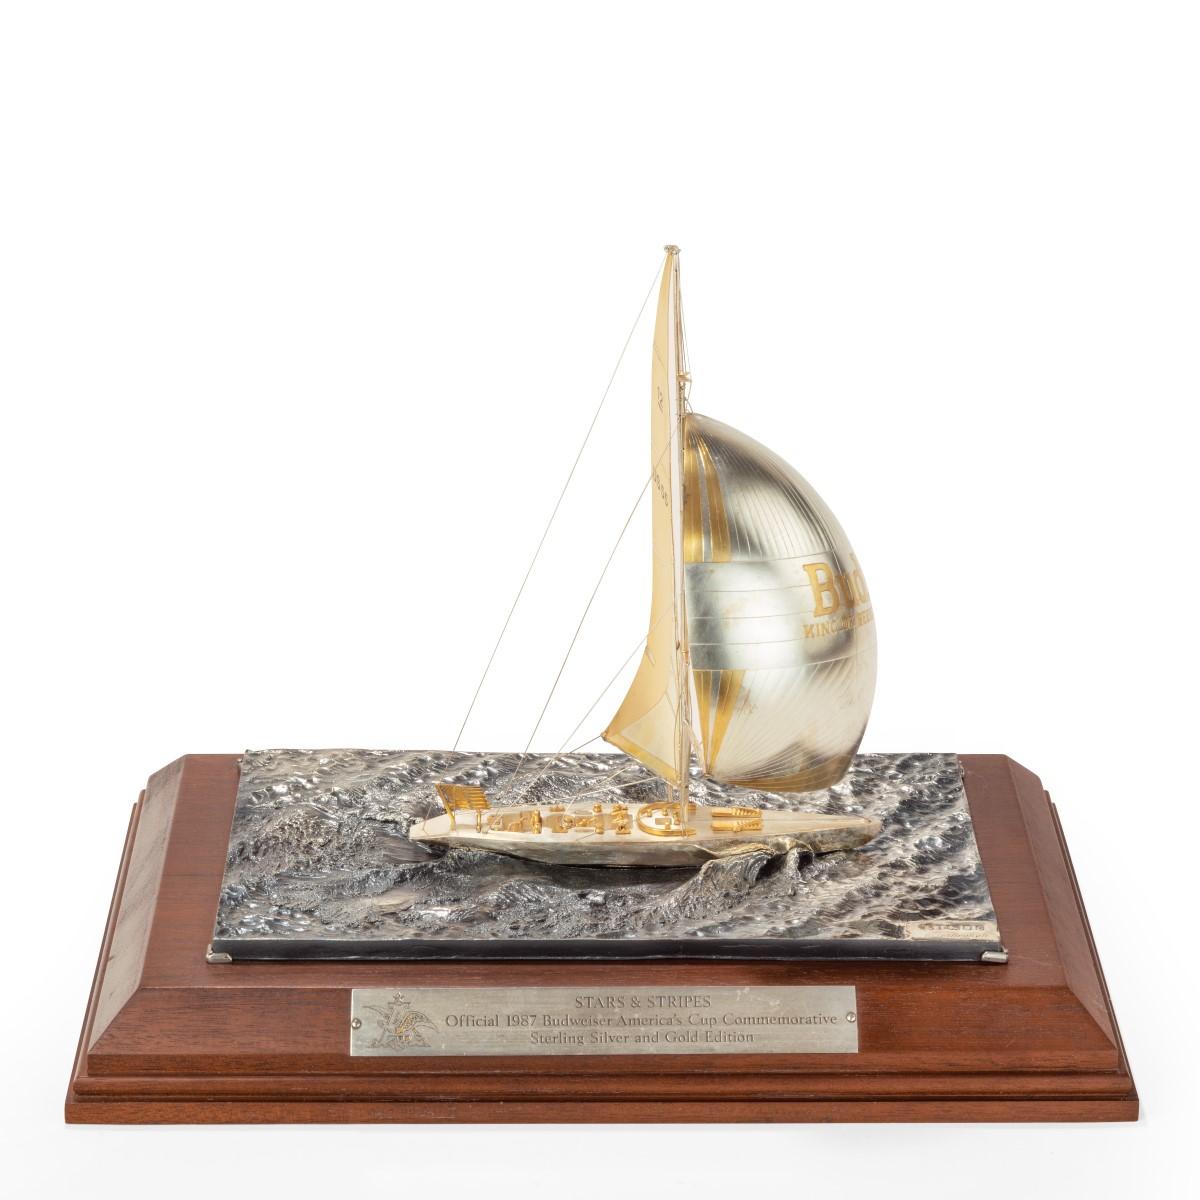 A cased silver and gilt model of 12 meter America’s Cup yacht Stars & Stripes 87, the yacht shown sailing under spinnaker. The mainsail with the numbers 12 US 55 the spinnaker with the legend ‘BUD King of Beers’. Hallmarked and signed Sterlinghall.